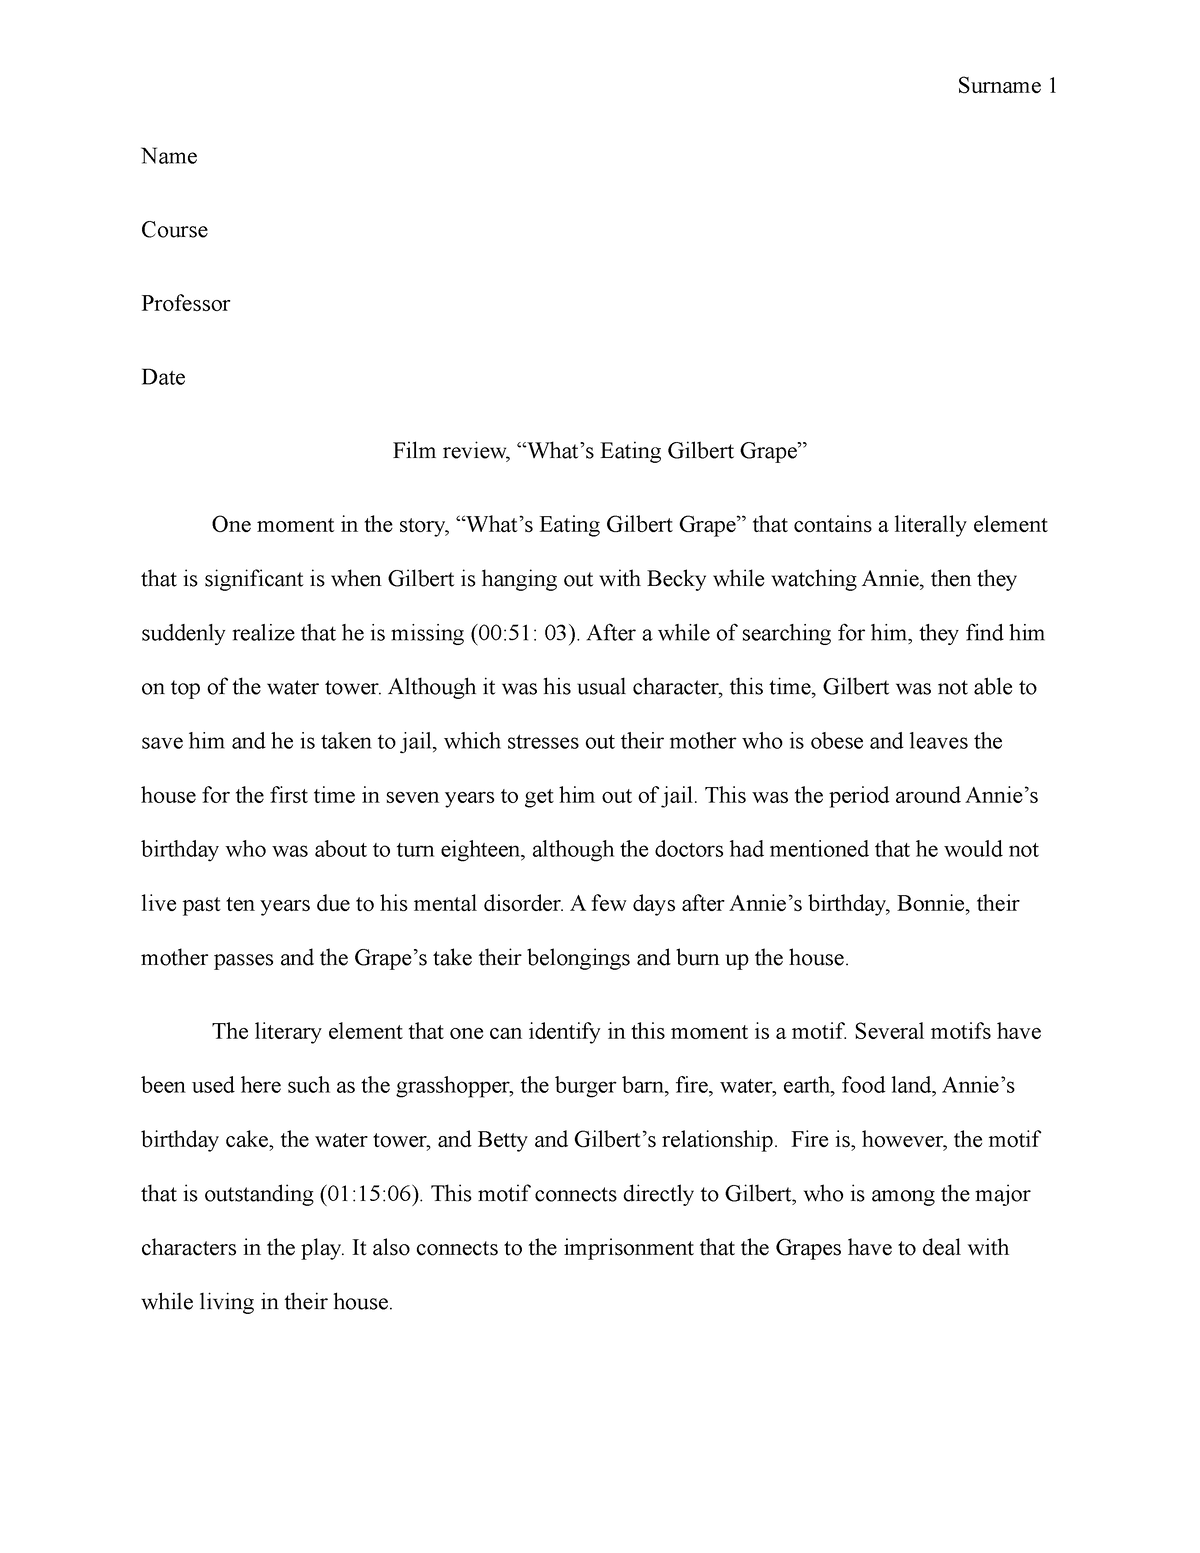 what eating gilbert grape essay introduction